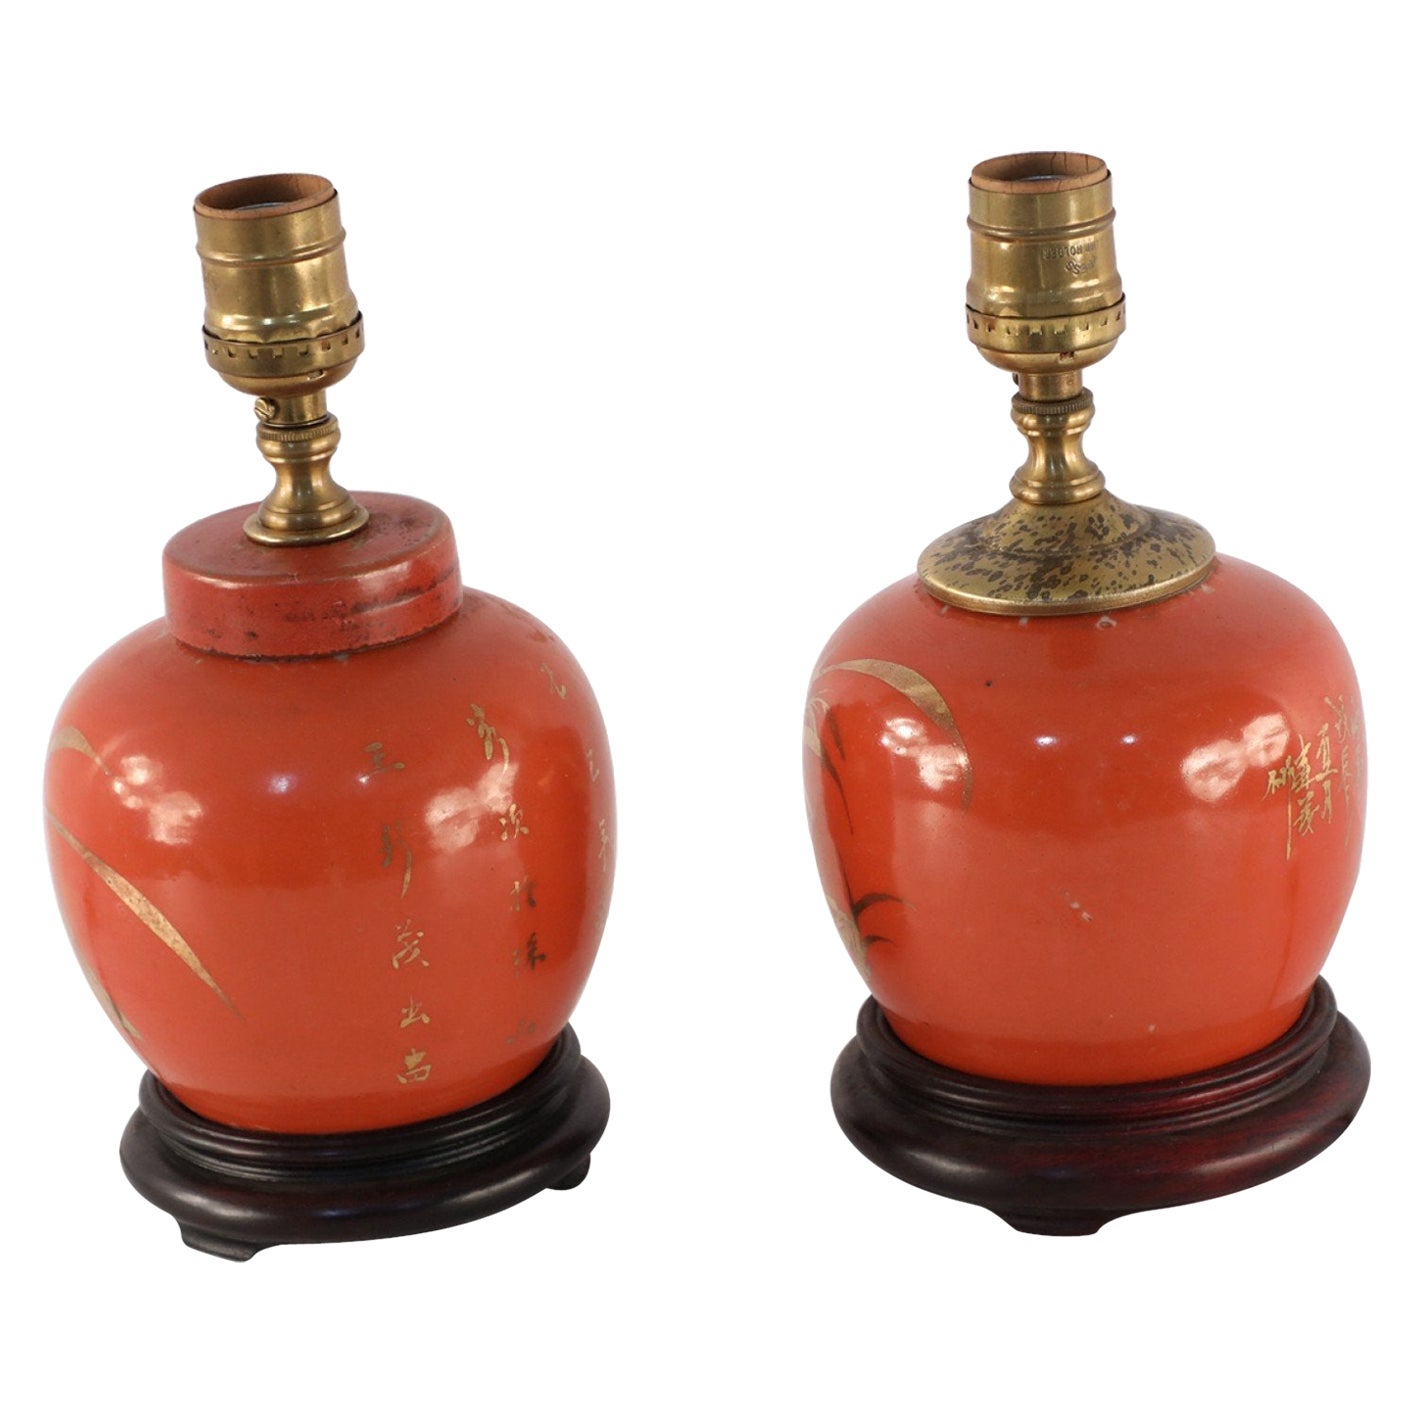 Pair of Antique Chinese Orange and Gold Bamboo Design Porcelain Table Lamps